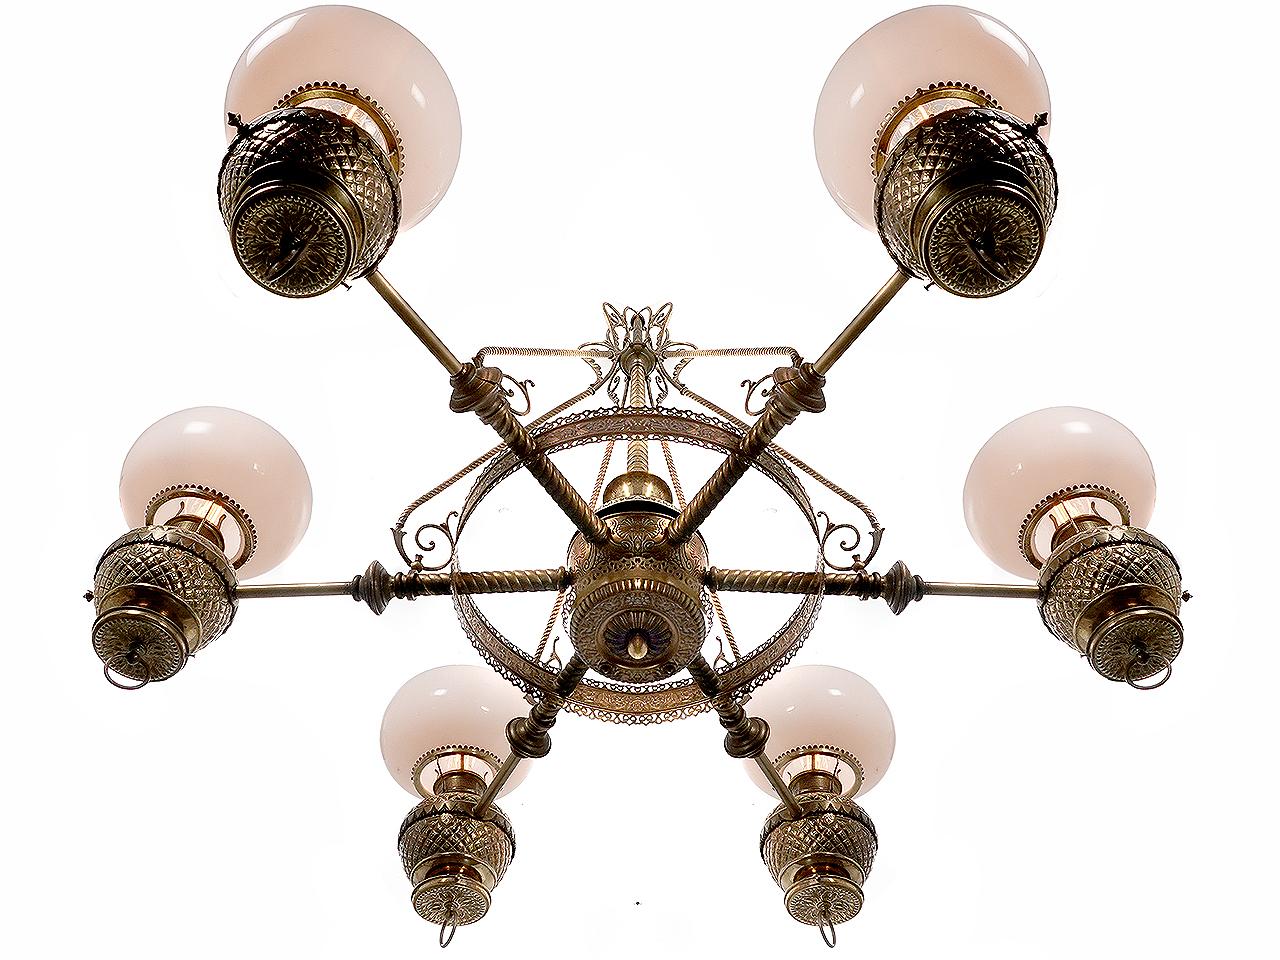 With a 54 inch diameter and 6 complete highly decorative oil lamps this chandelier presents itself as a very impressive fixture. Note the 6 original bun shaped milk glass outer shades. If you are looking to make an important statement This lamp is